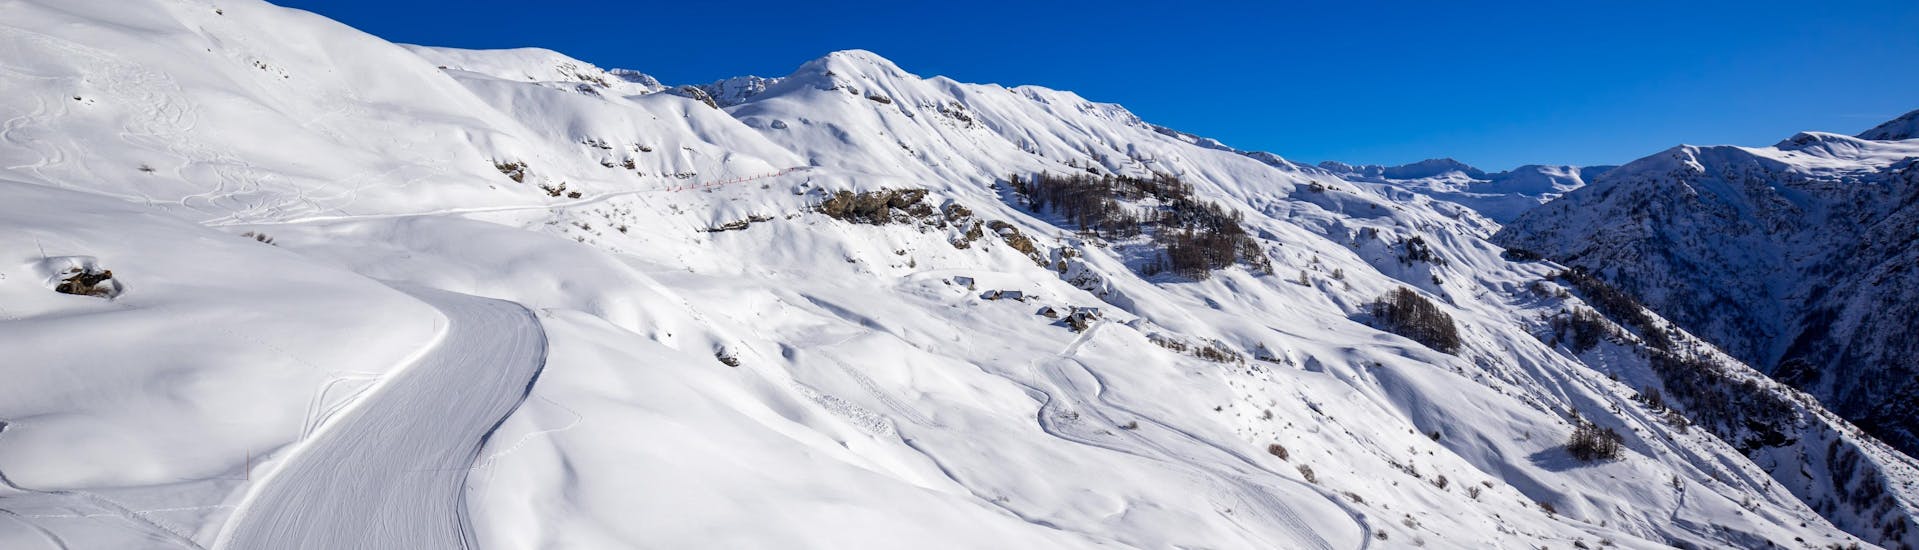 View of the snow covered mountain landscape of the ski resort Orcières Merlette 1850 in Haute-Alpes, where local ski schools offer their ski lessons.